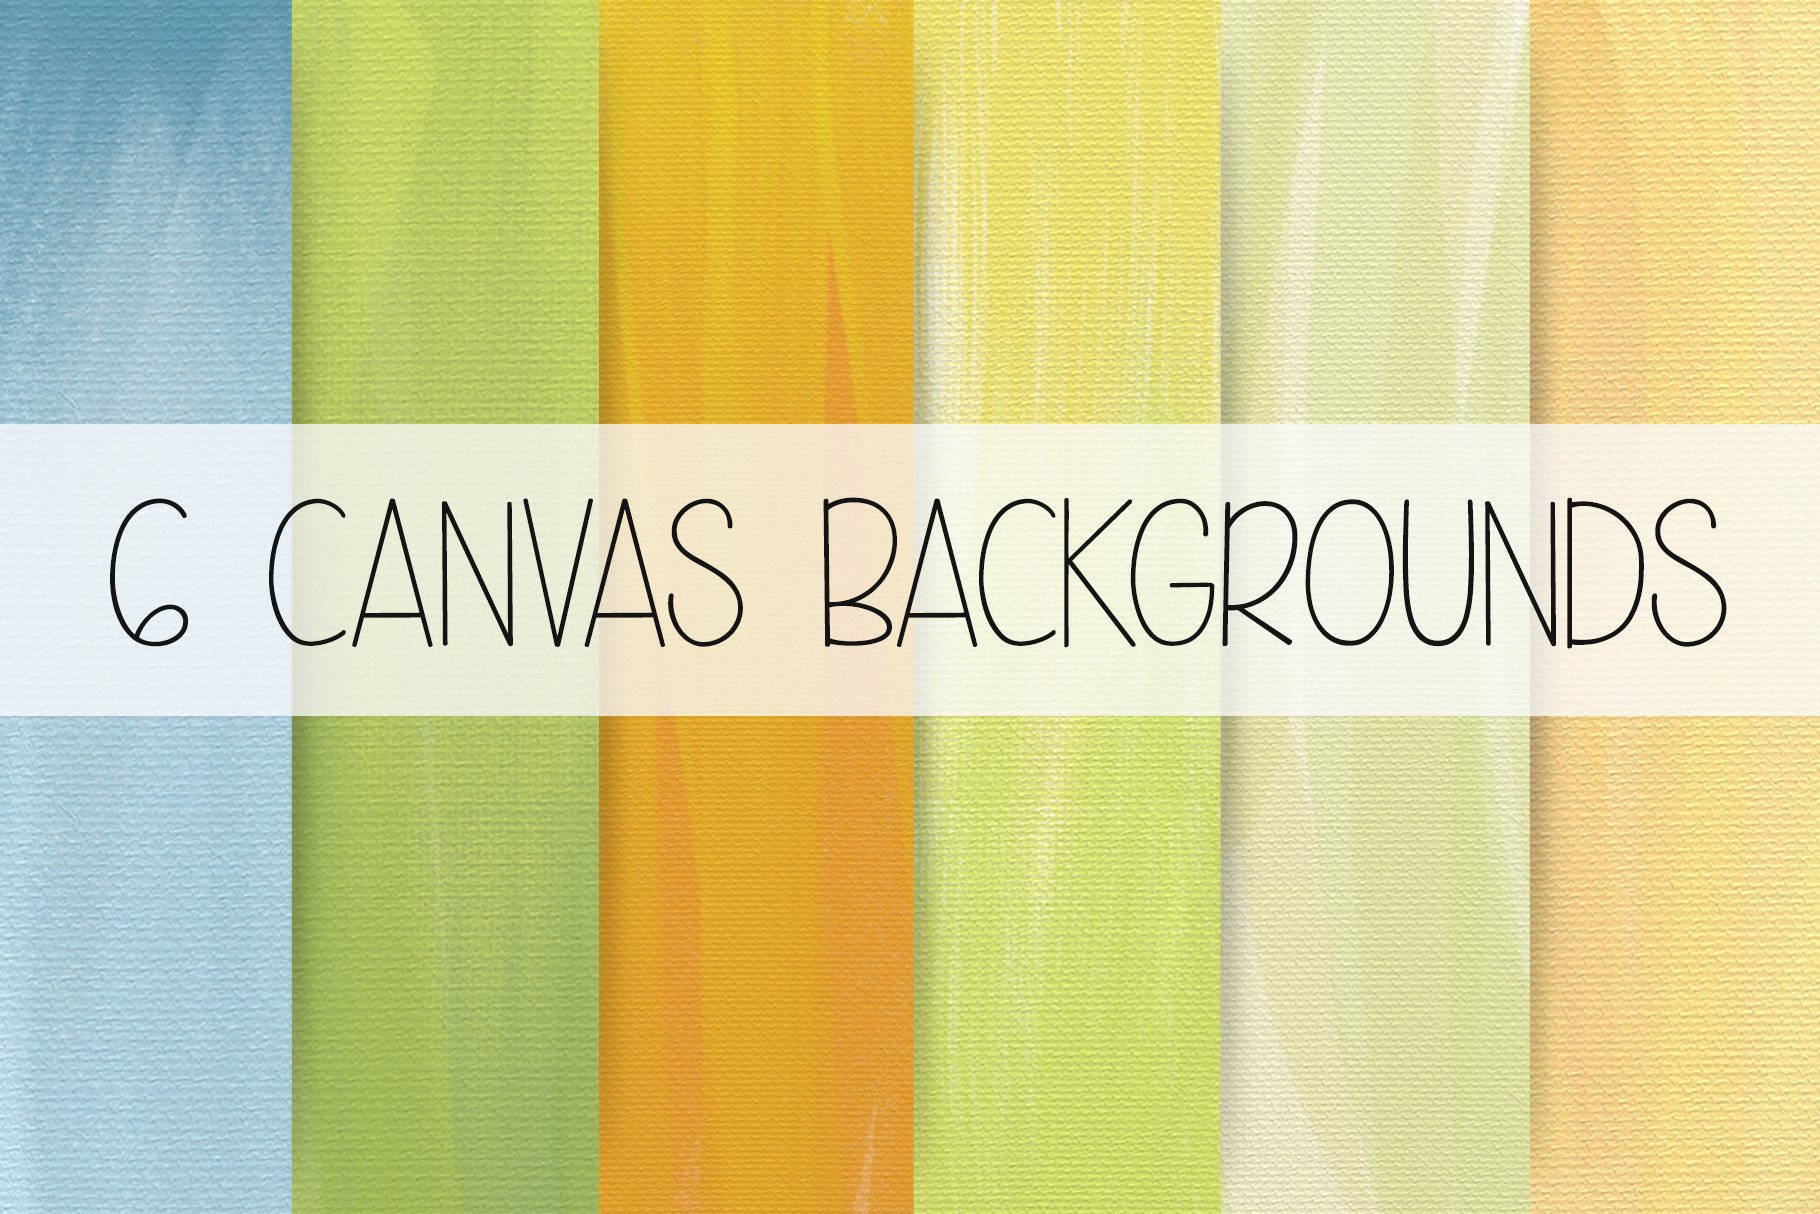 6 Canvas Backgrounds cover image.